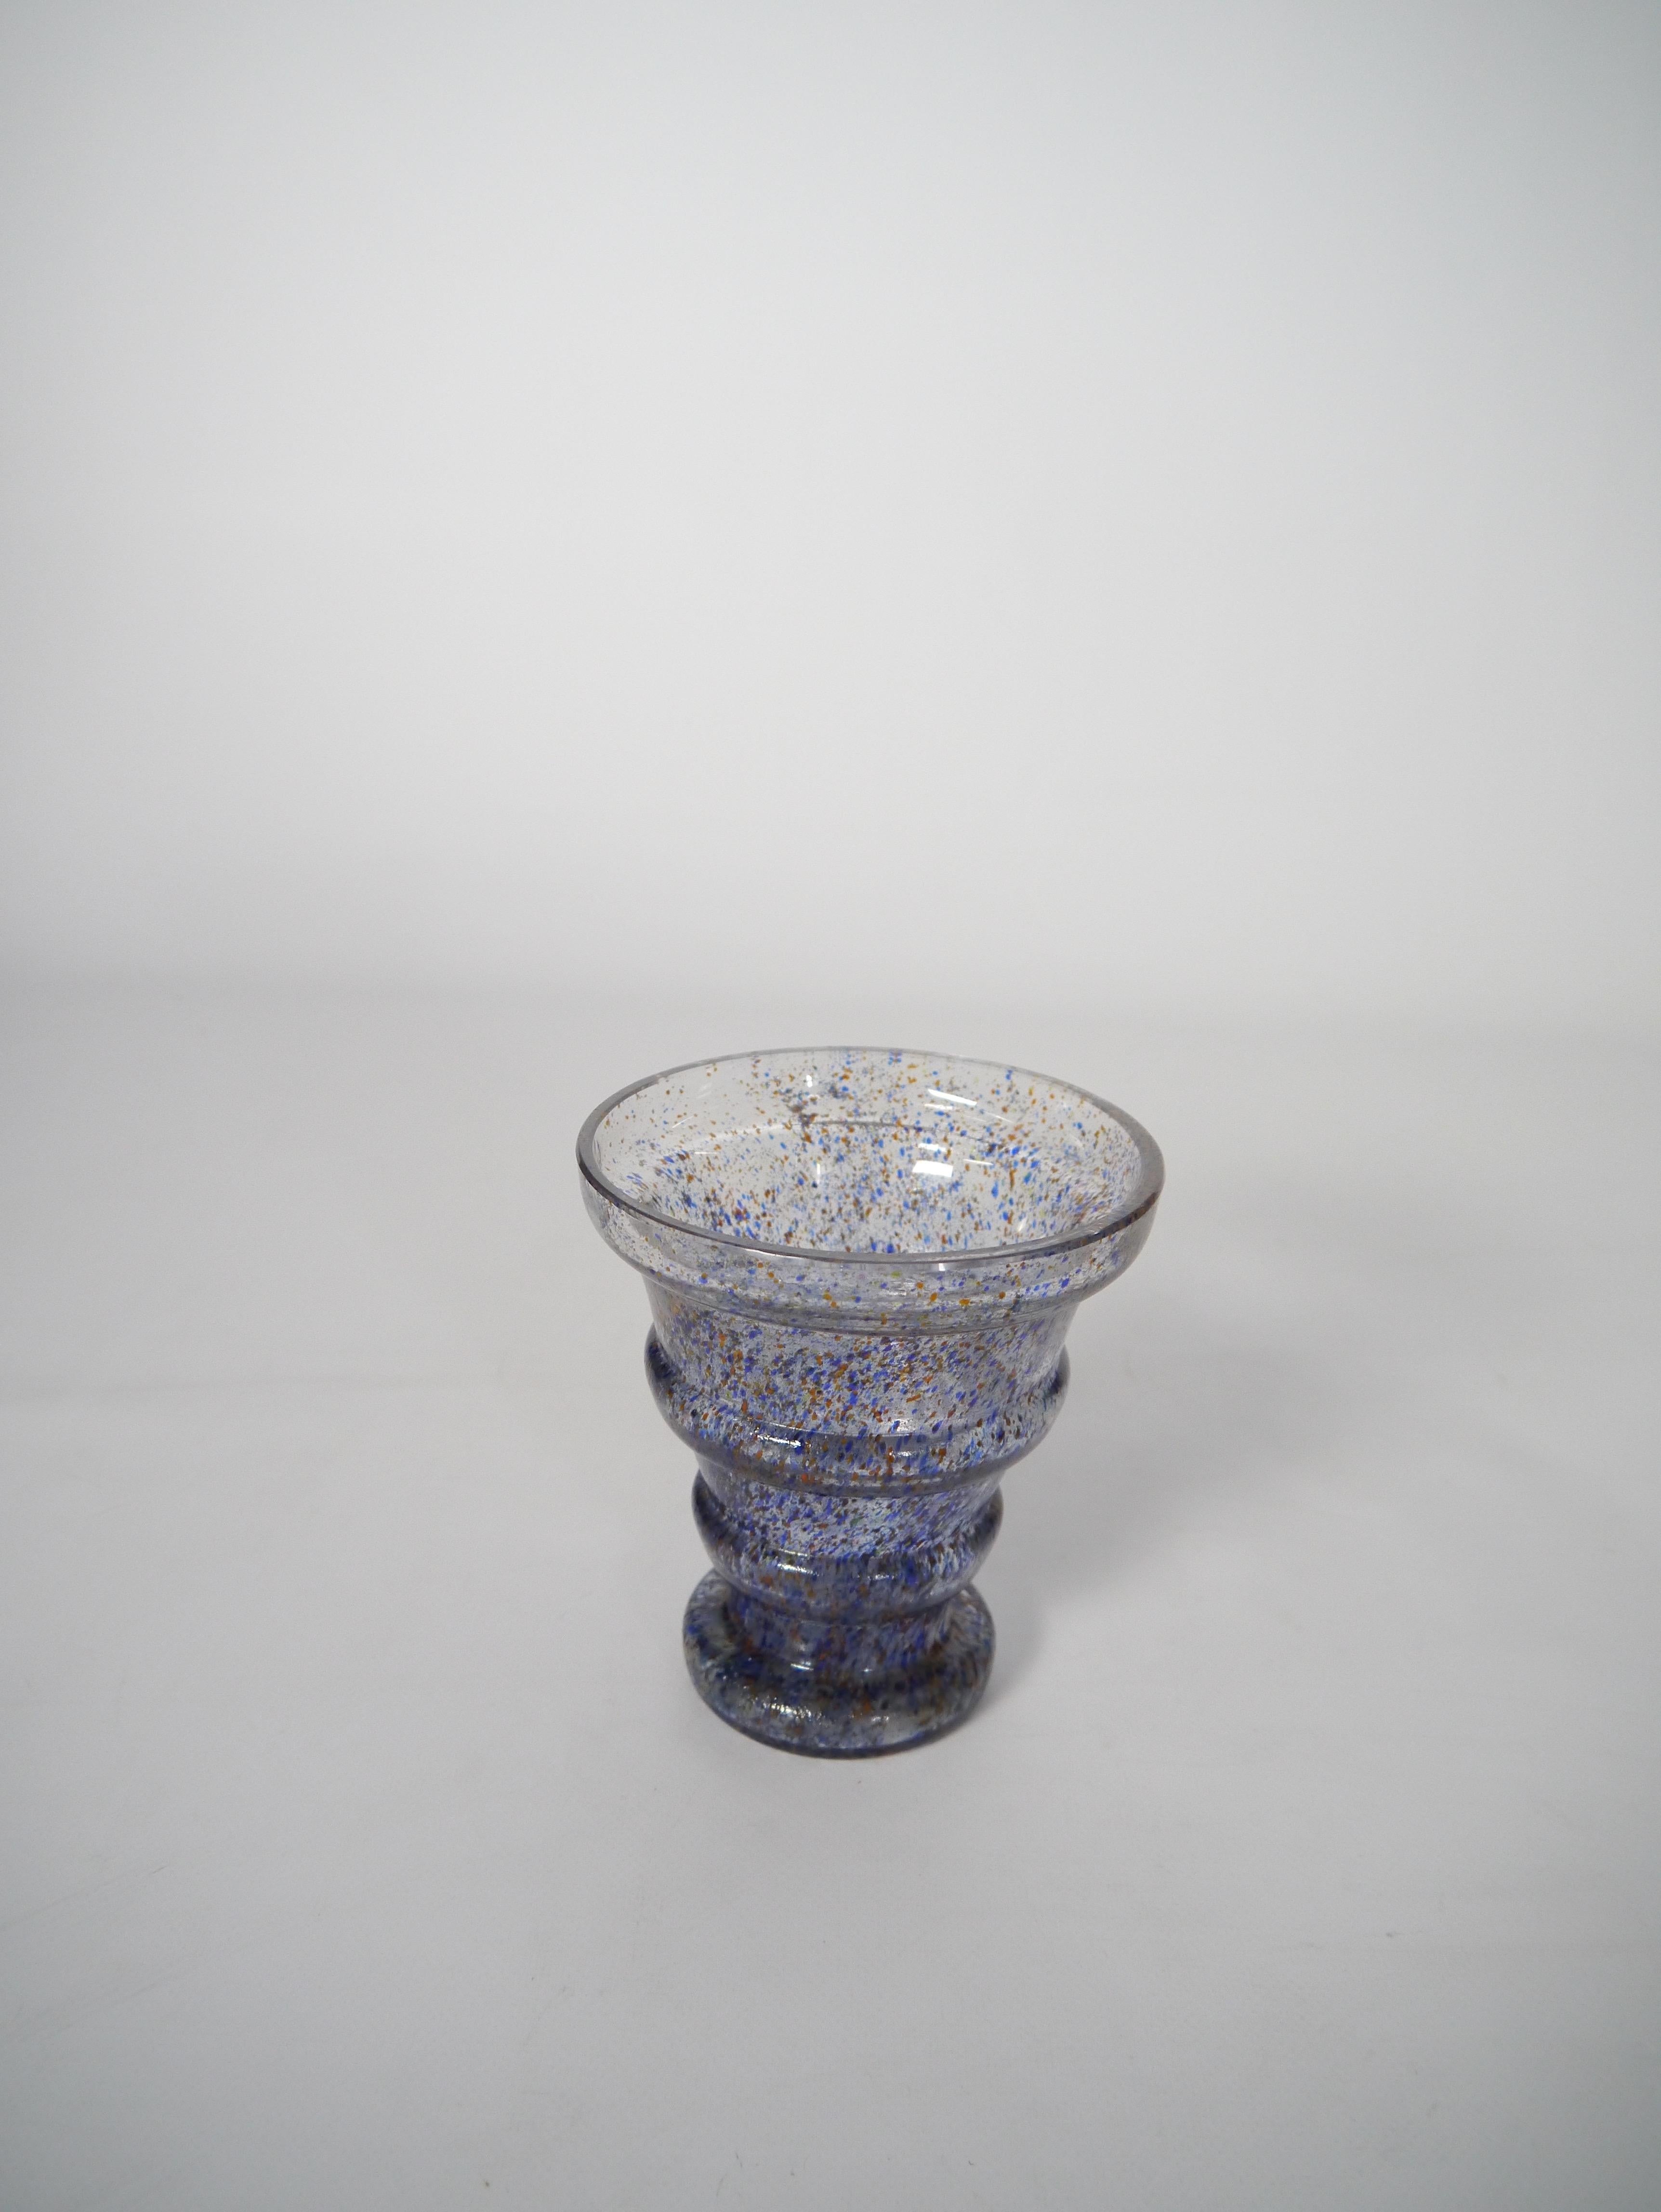 Early Modernist Glass Vase by Sven X:et Erixson for Kosta, Sweden, 1930s For Sale 1